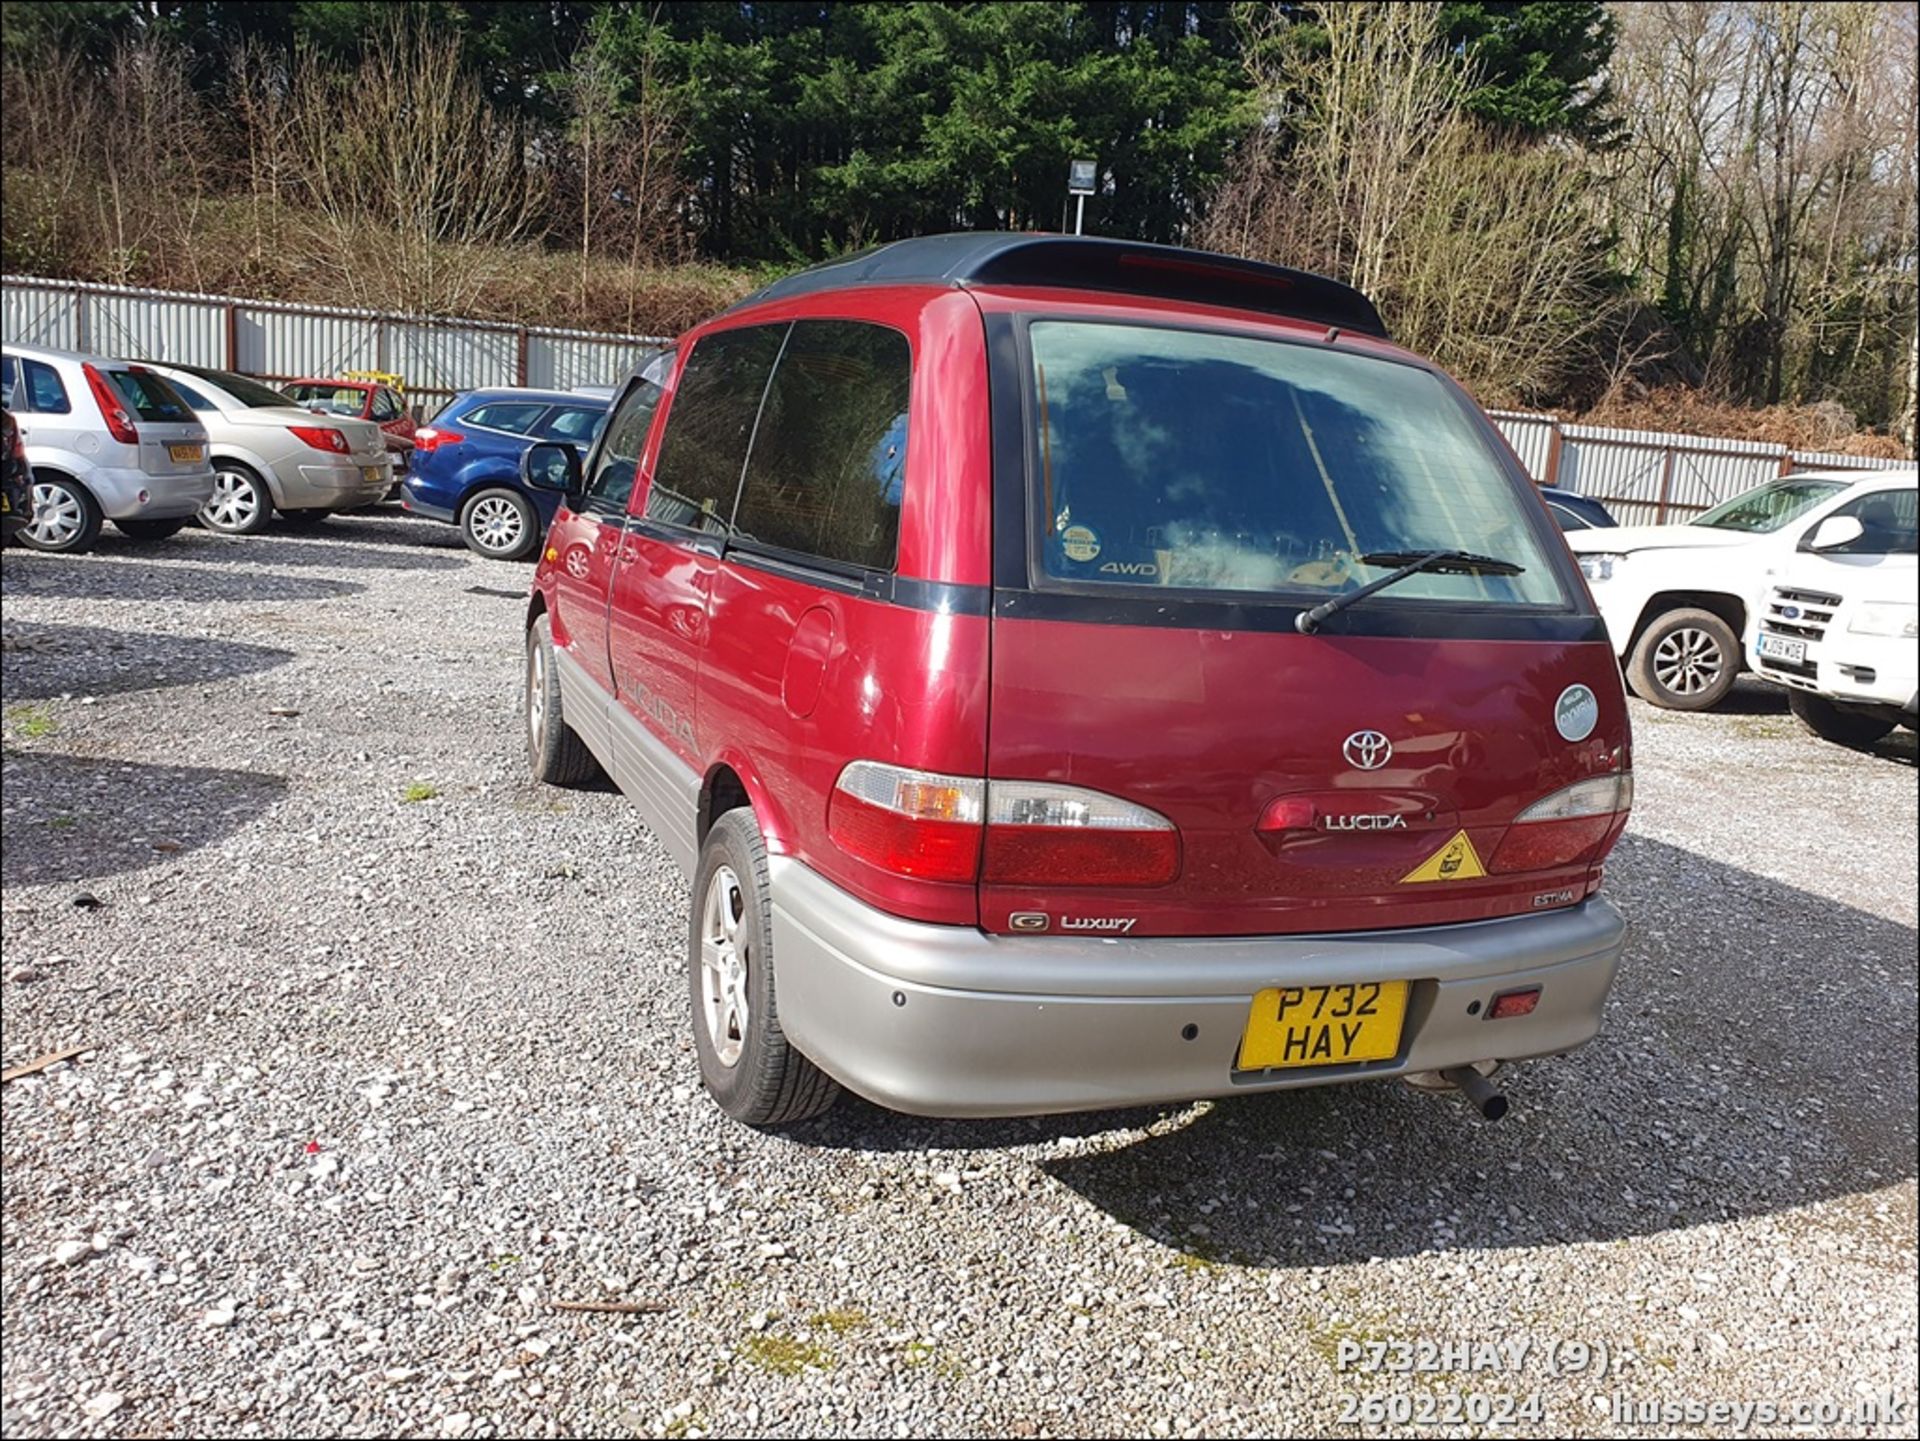 1997 TOYOTA LUCIDA - 2184cc 4dr Van (Red) - Image 10 of 22